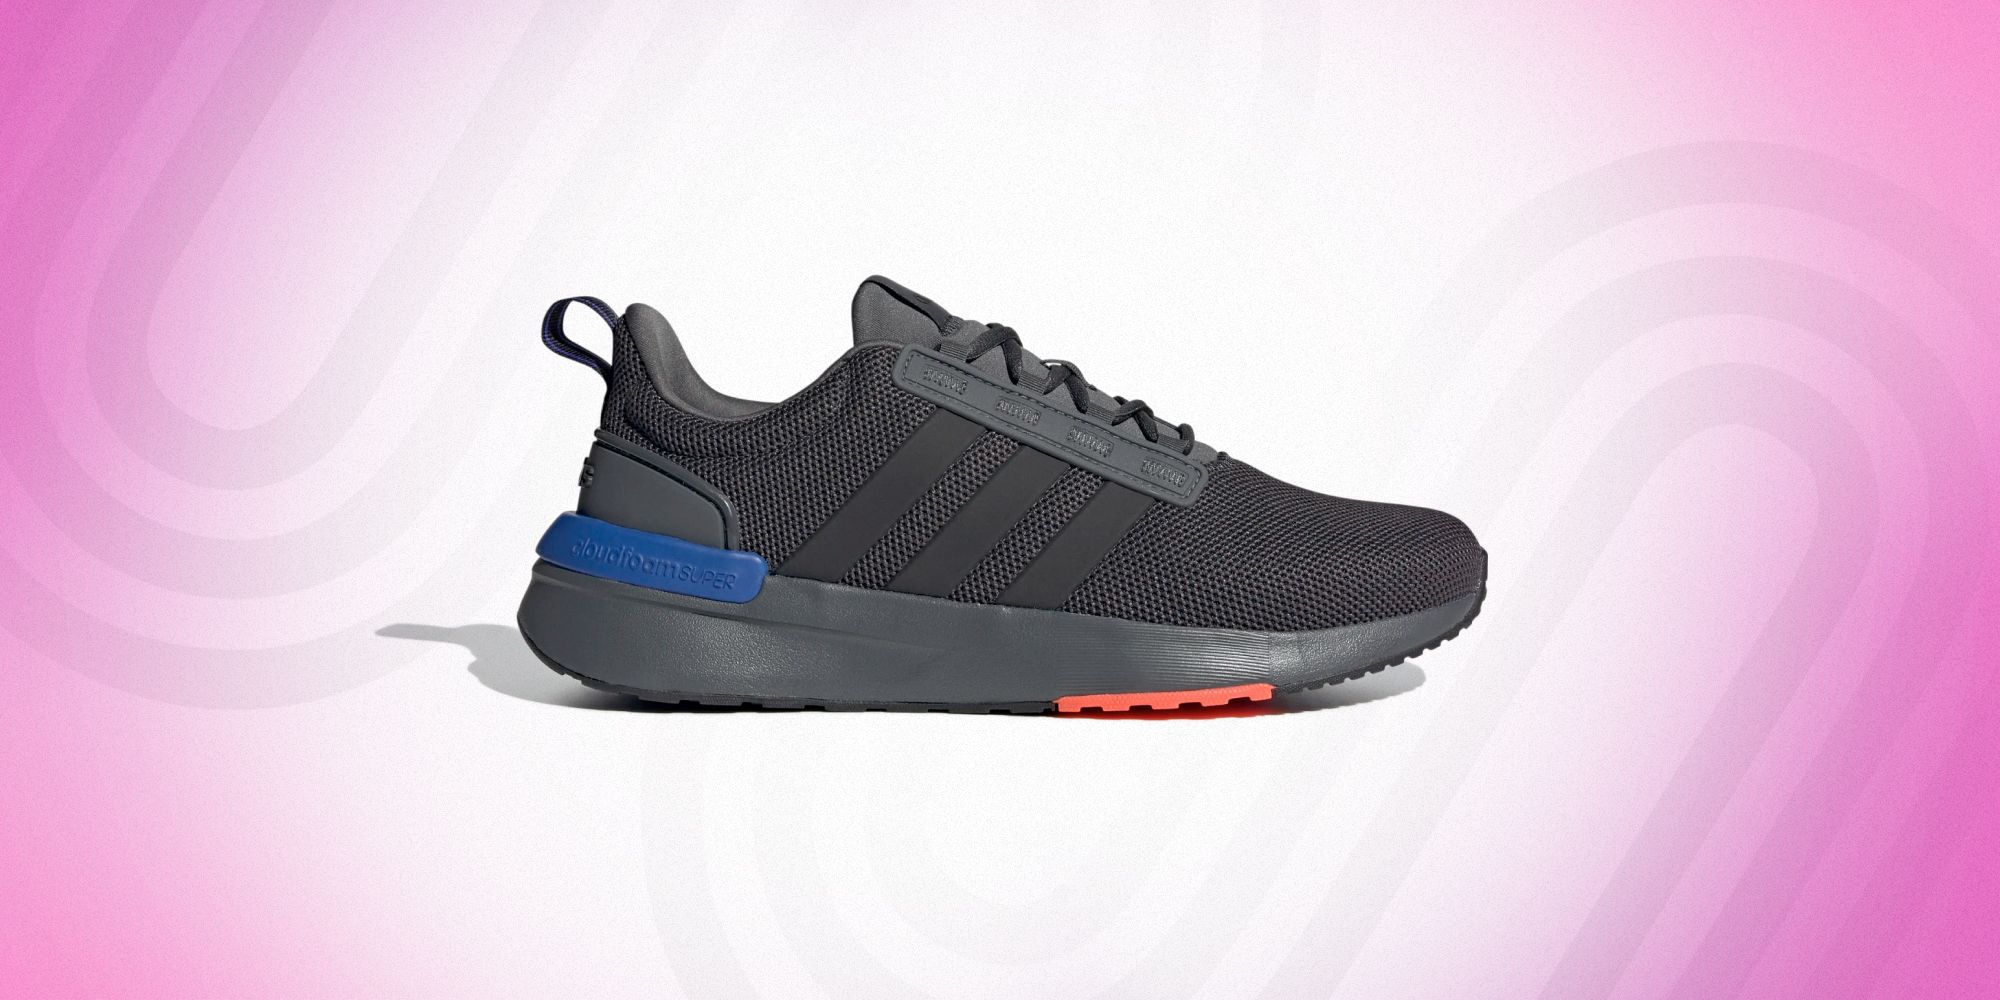 autopista superficie diluido Refresh Your Running Gear With This Surprise Adidas Sale